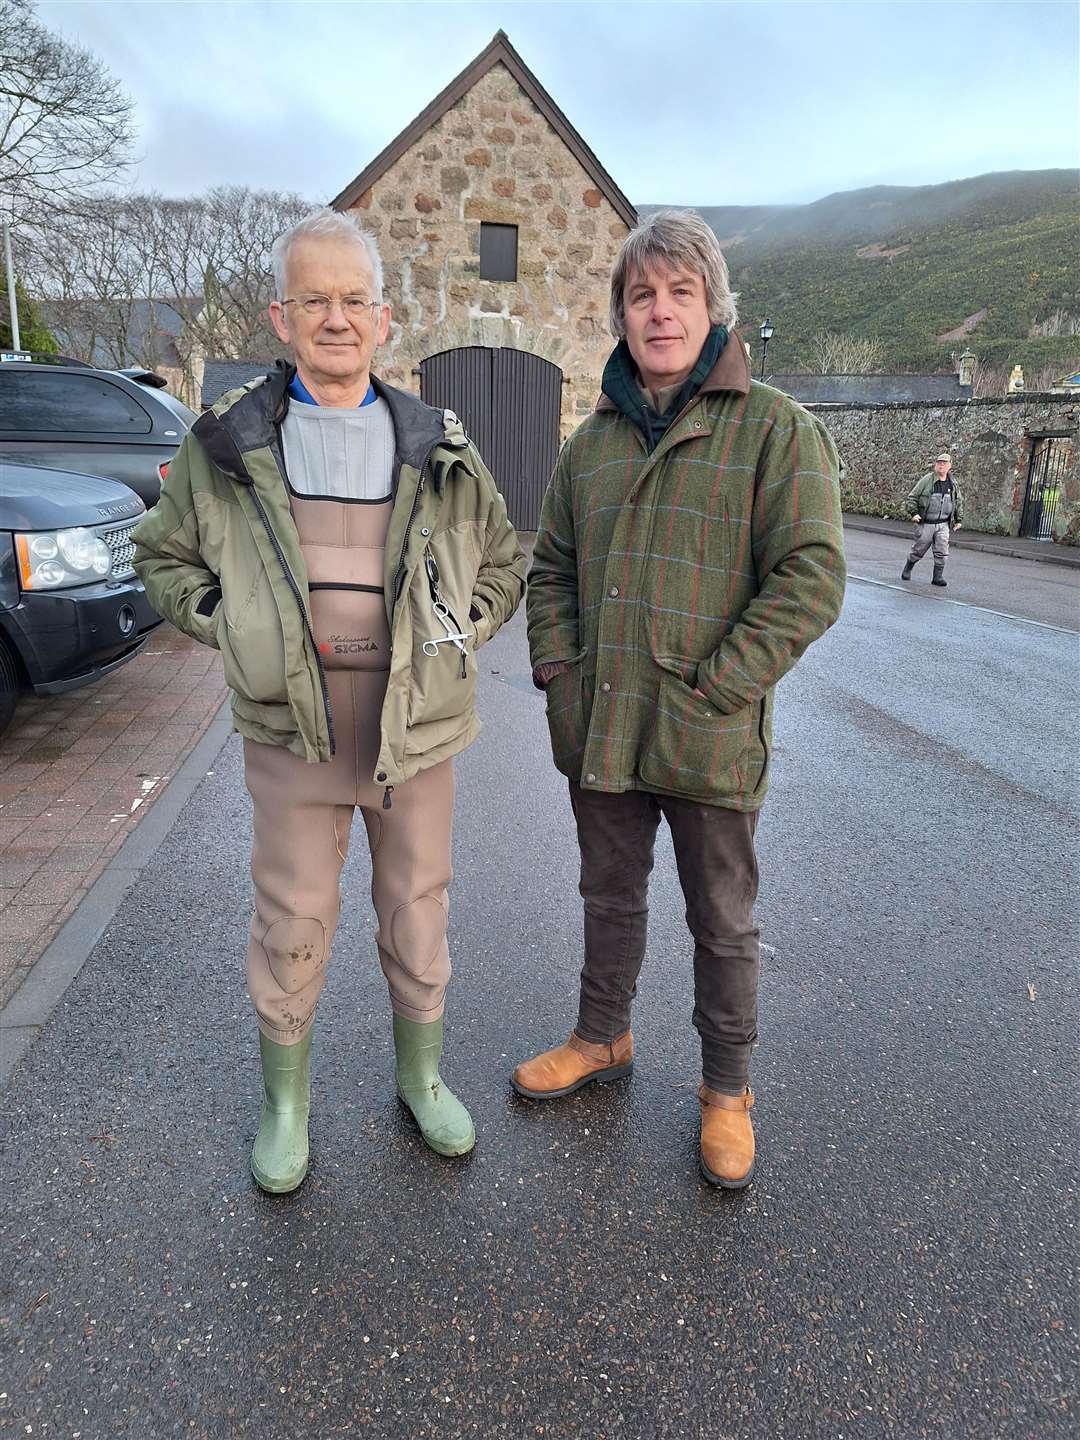 Michael Donnachie, left, from Dingwall, and Jonathan Massey, Langholm, Dumfries and Galloway.